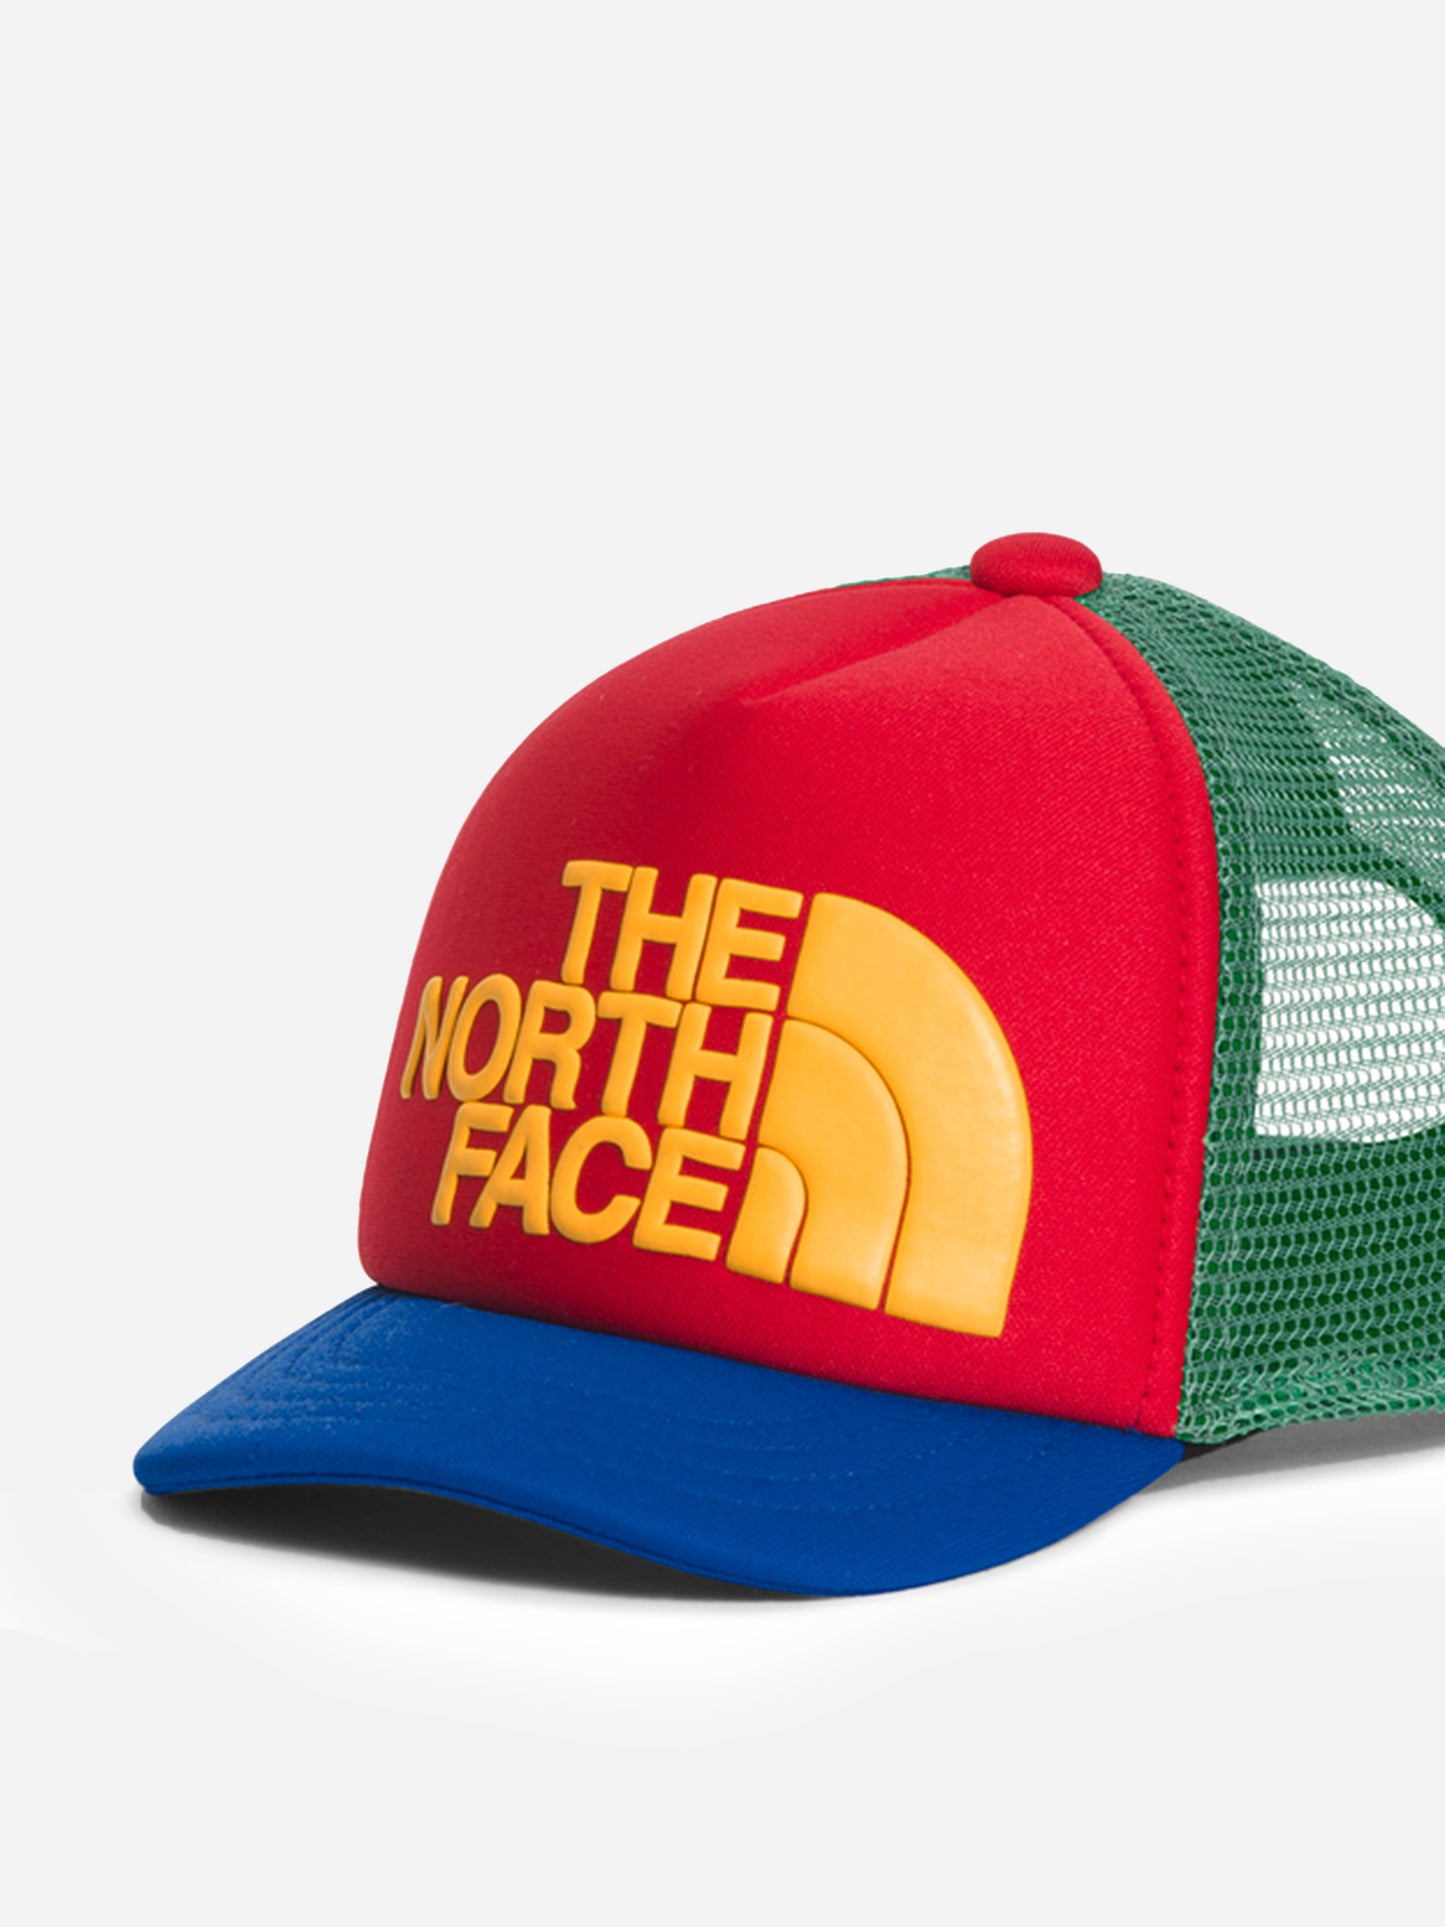 The North Face Baby Foam Trucker Hat